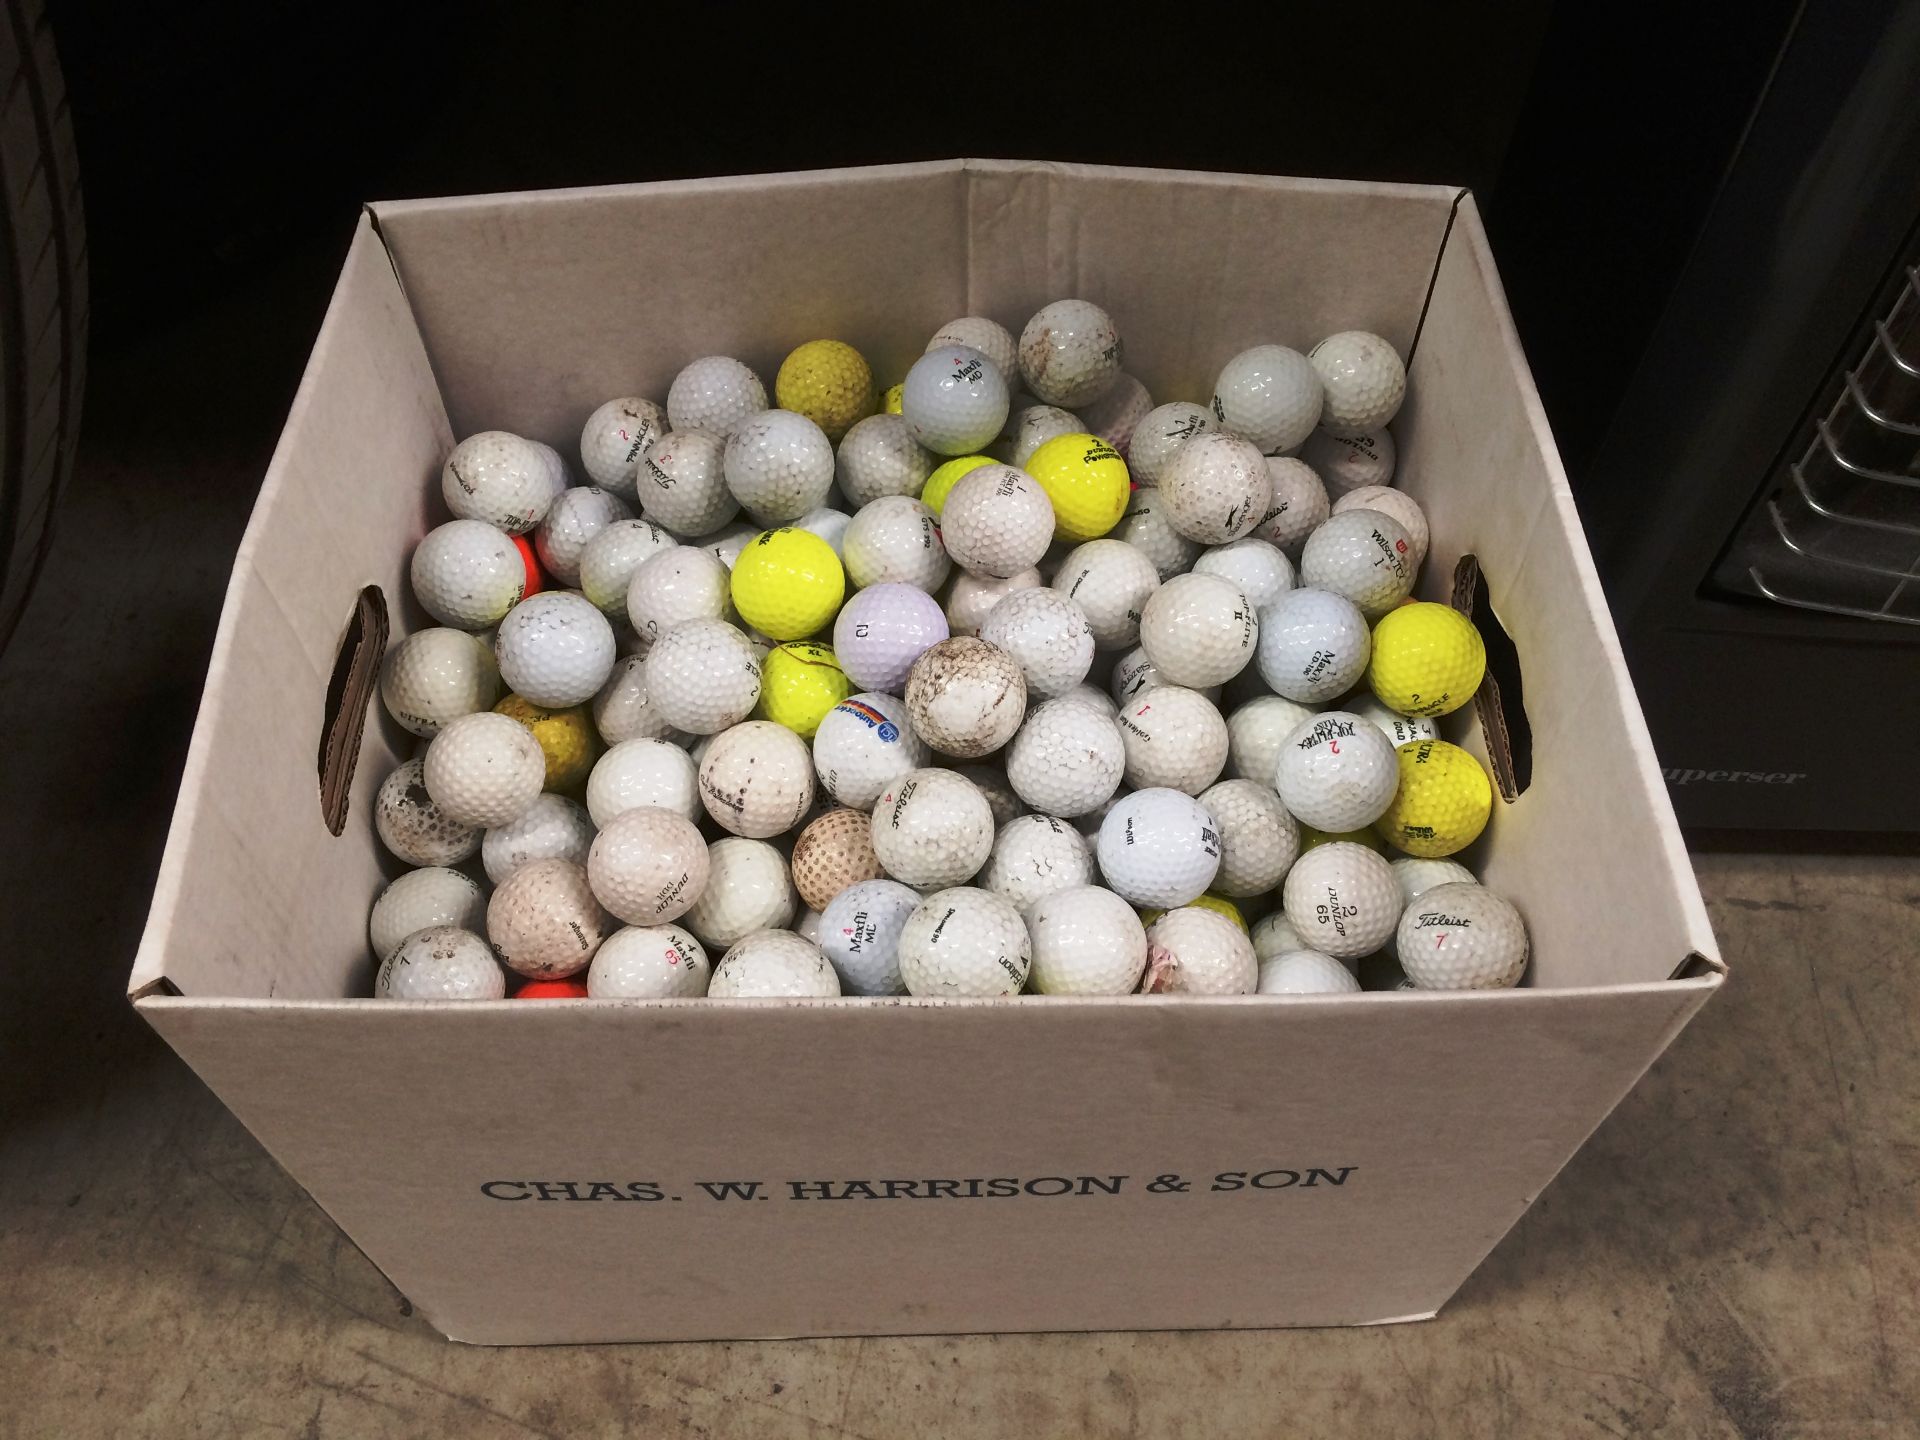 Contents to box an extremely large quantity of second hand golf balls